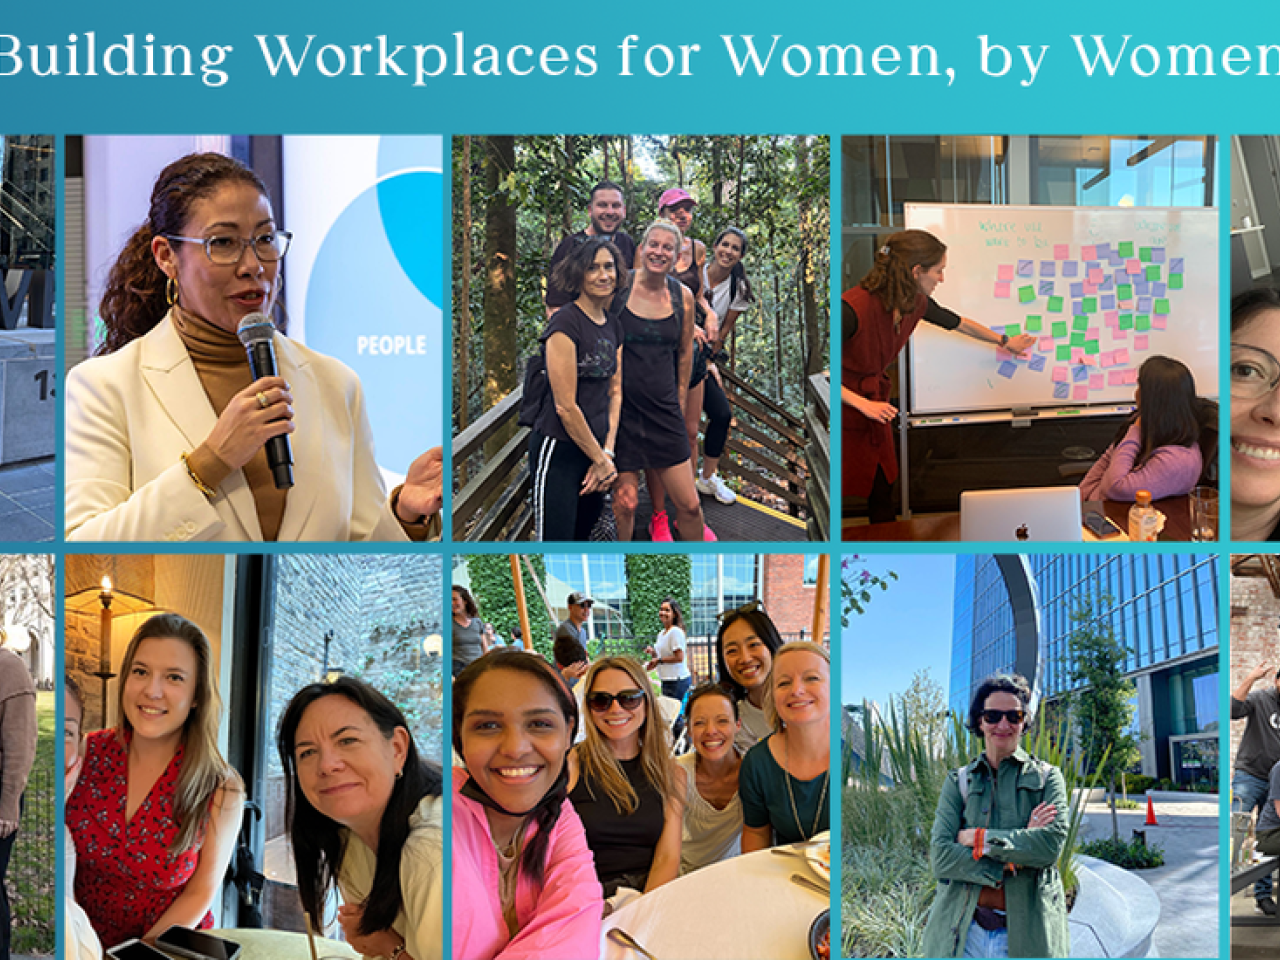 "Building Workplaces for Women, by Women" with collage of women